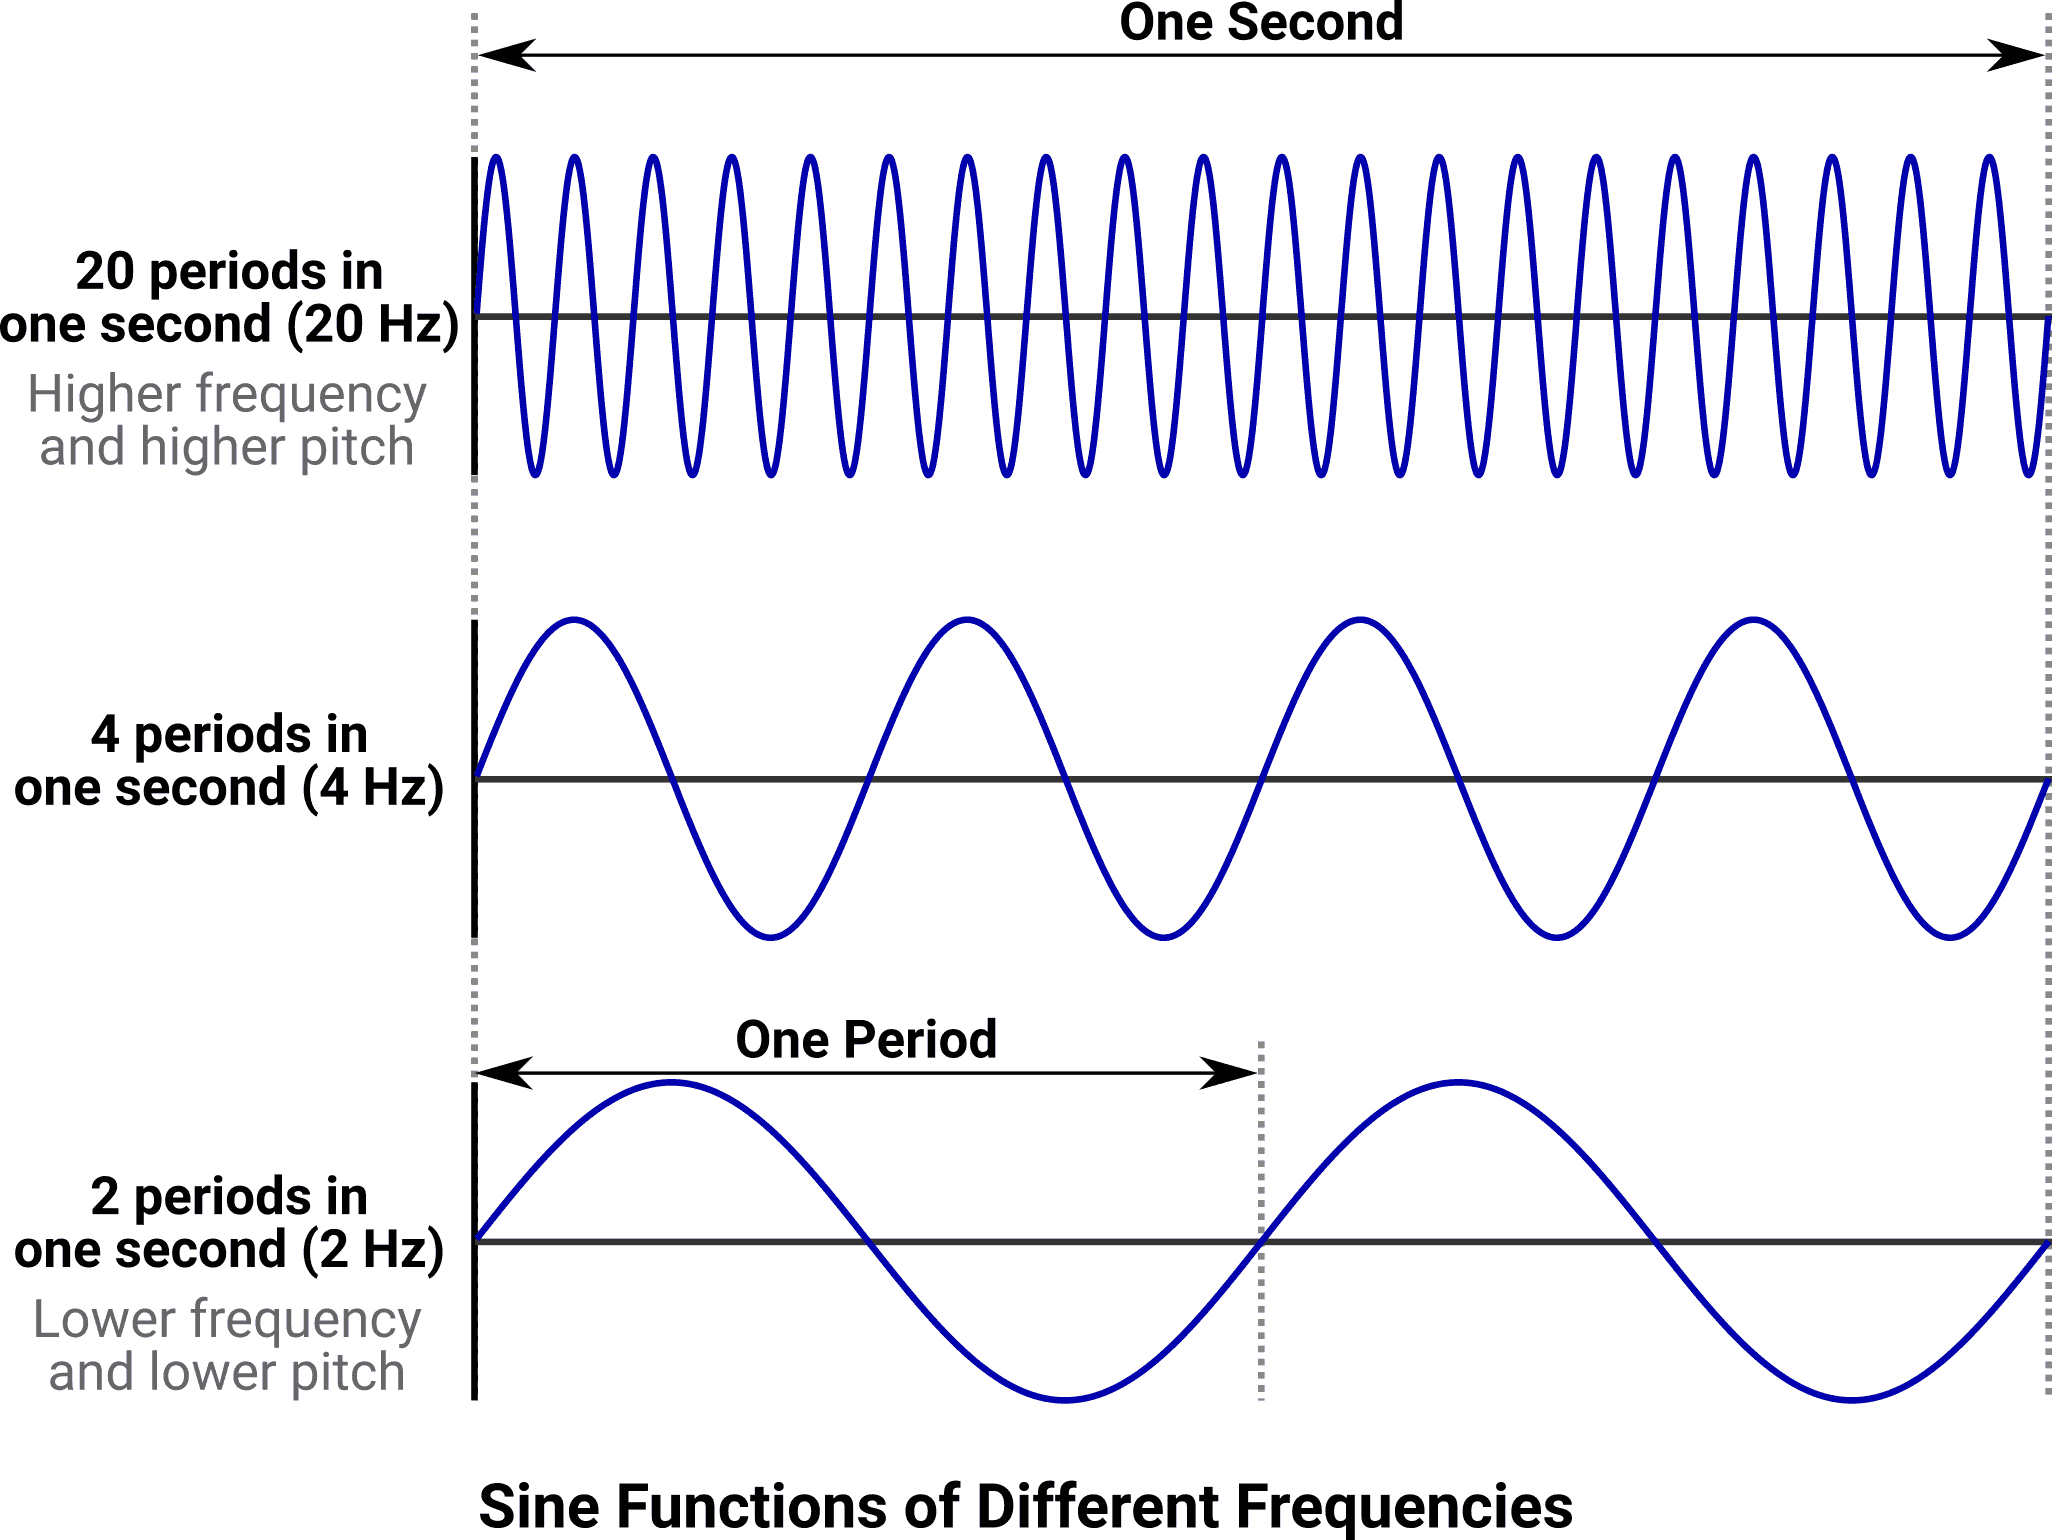 Examples of different frequencies applied to the sine function.